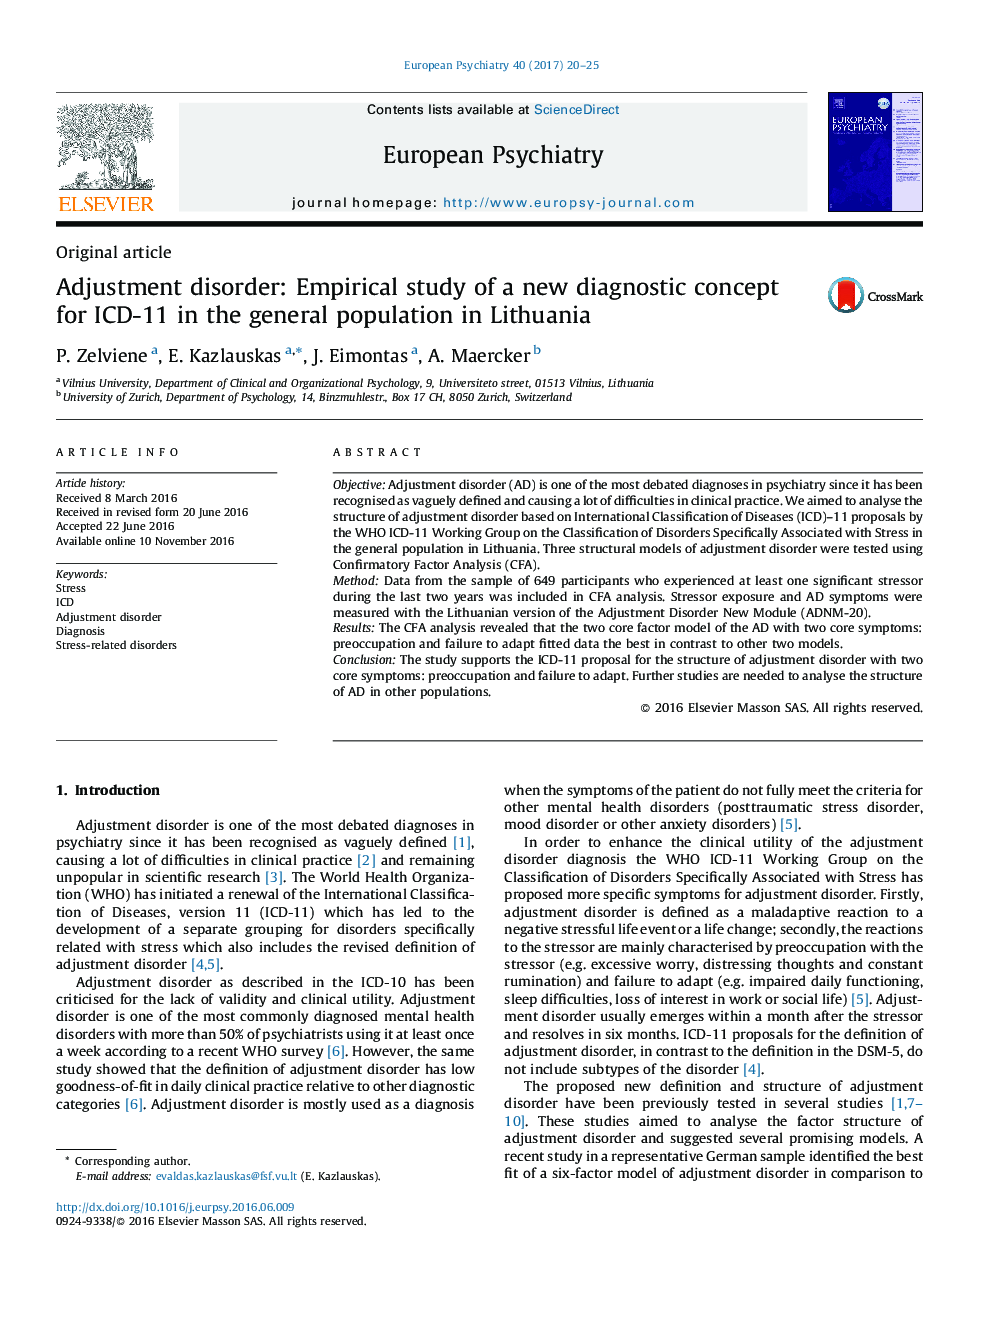 Original articleAdjustment disorder: Empirical study of a new diagnostic concept for ICD-11 in the general population in Lithuania